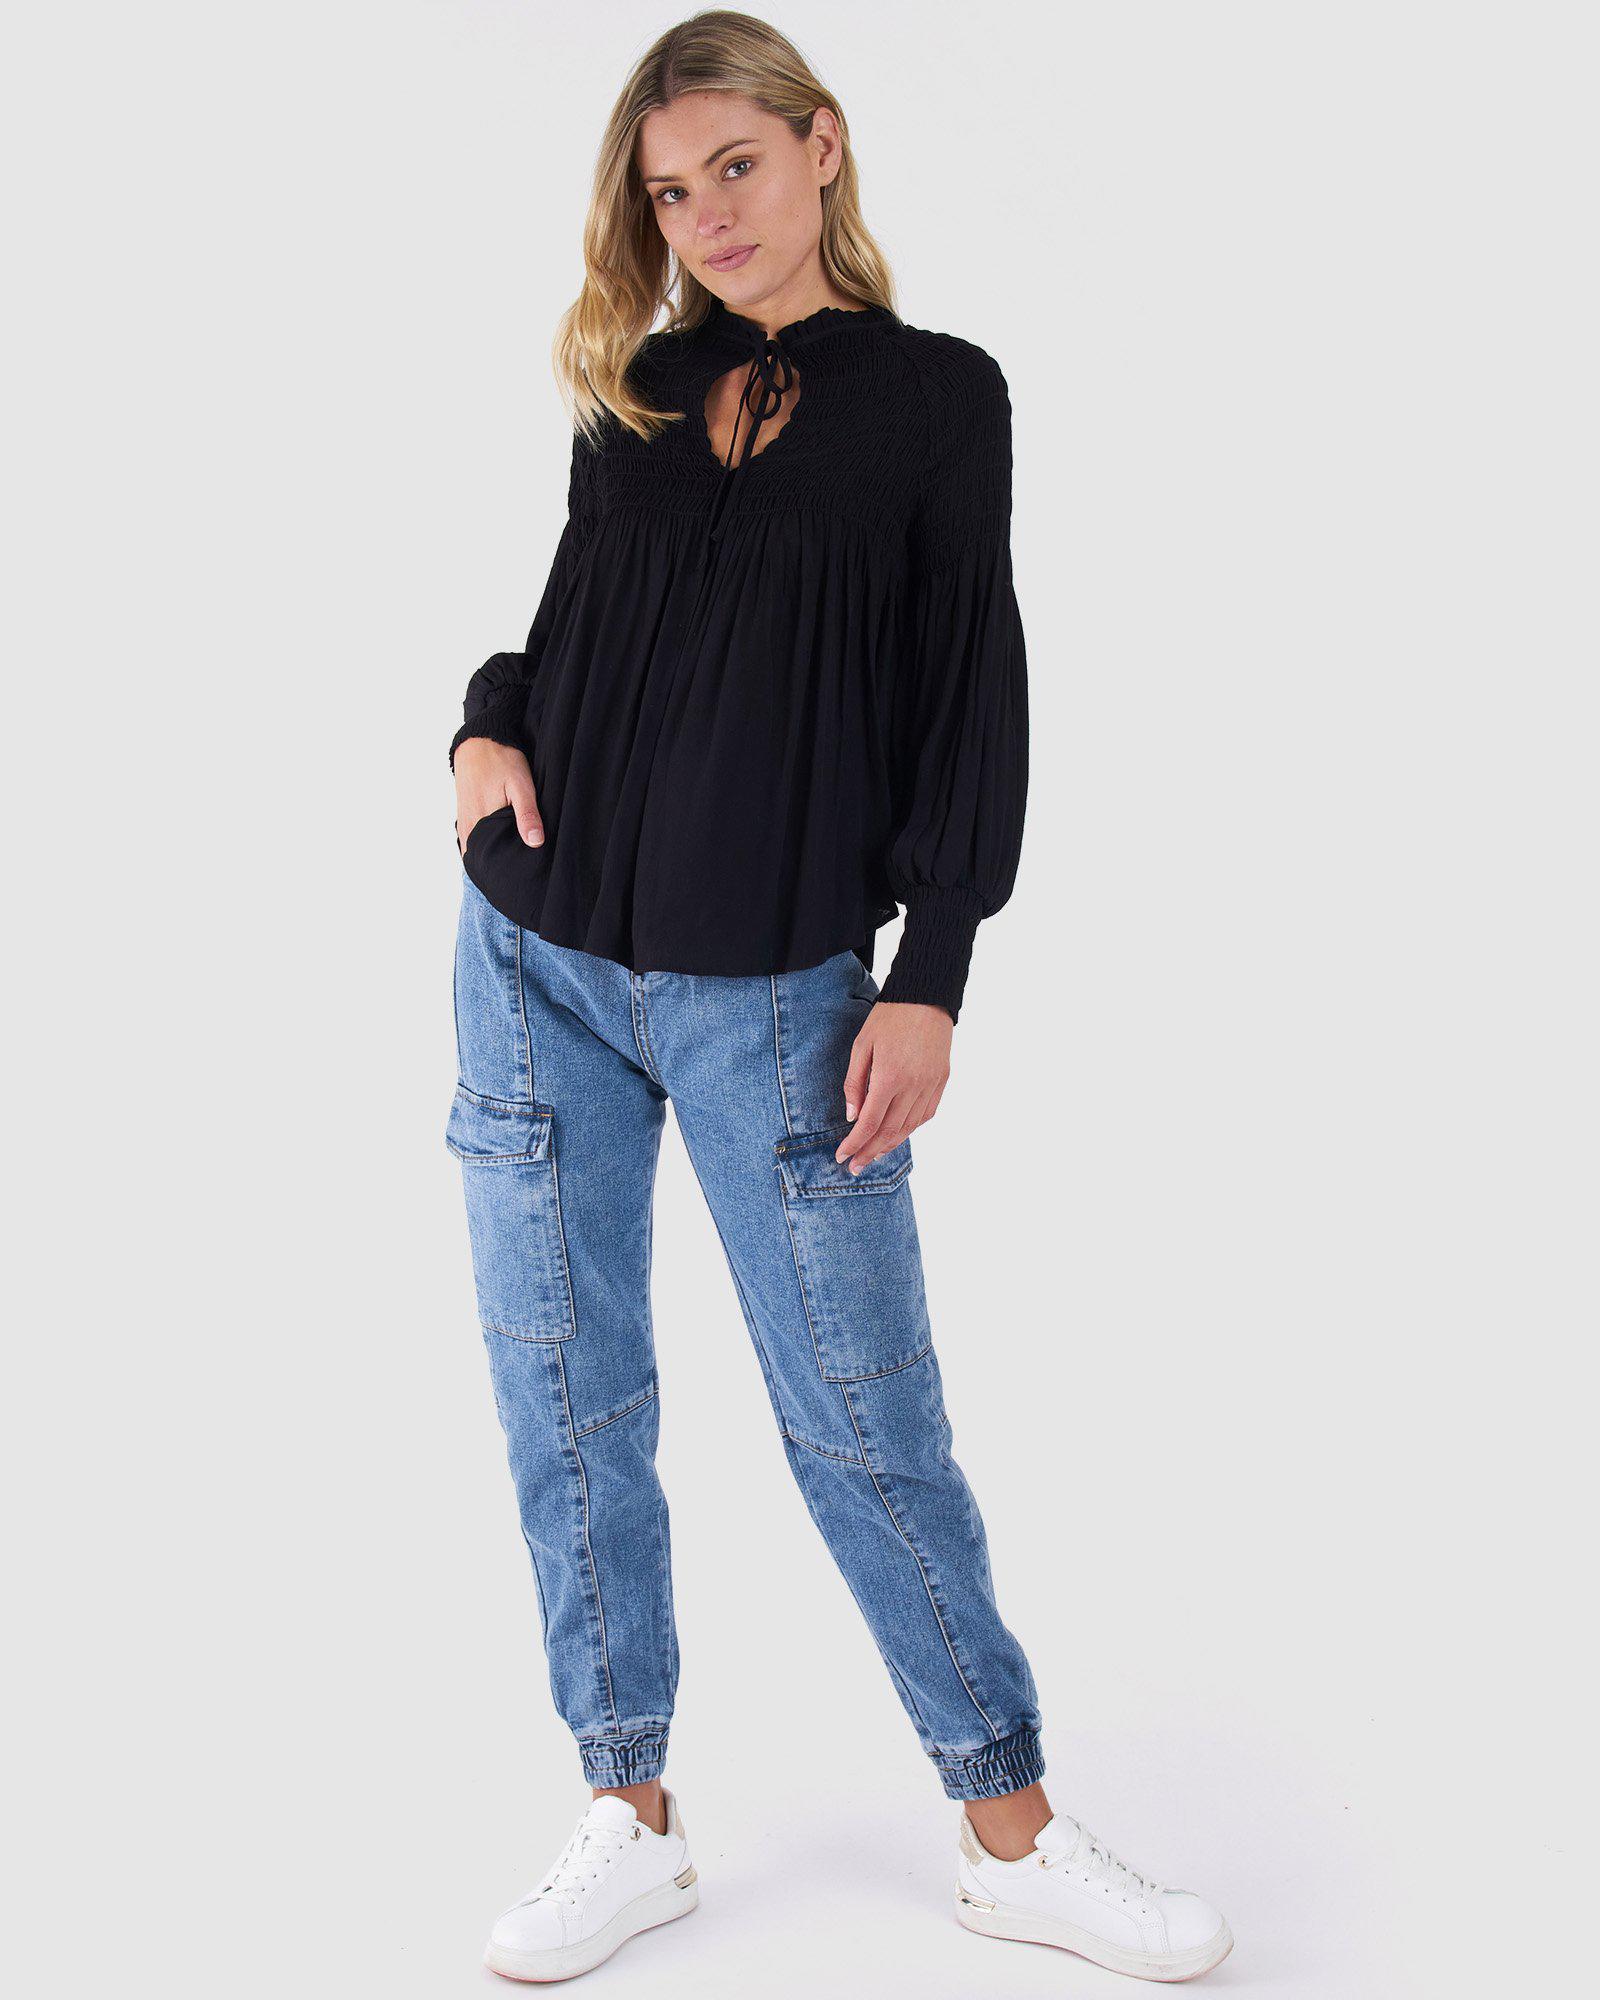 Ada L/S Top - Black - Sass - FUDGE Gifts Home Lifestyle